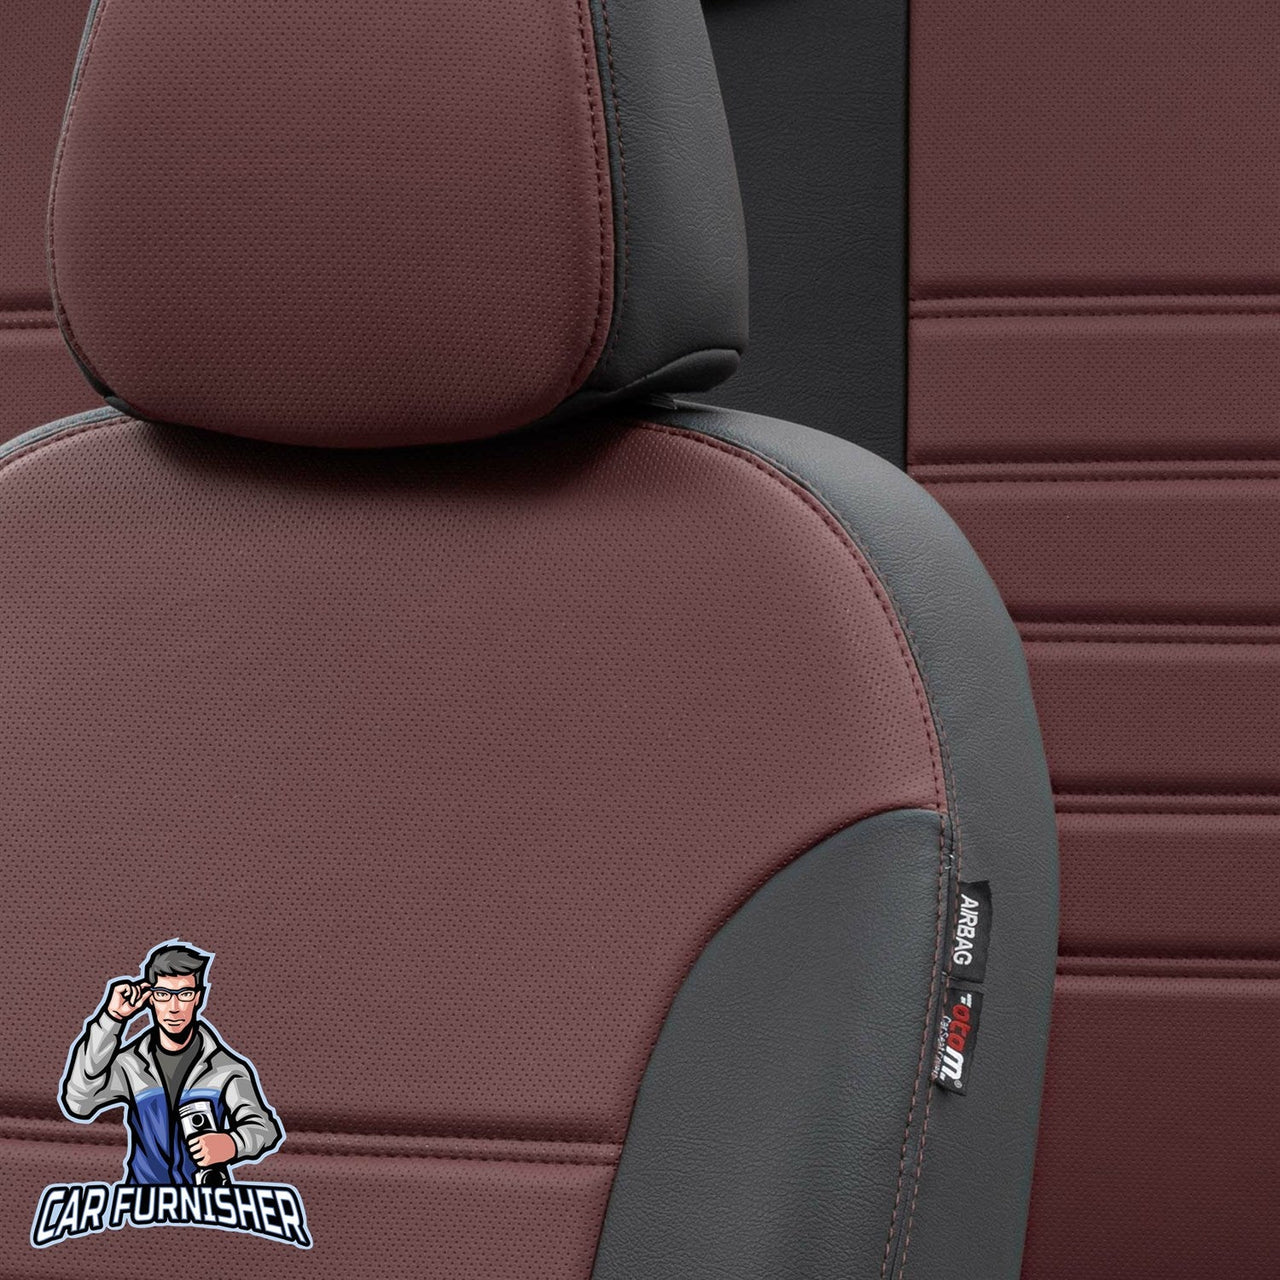 Jeep Wrangler Seat Covers Istanbul Leather Design Burgundy Leather